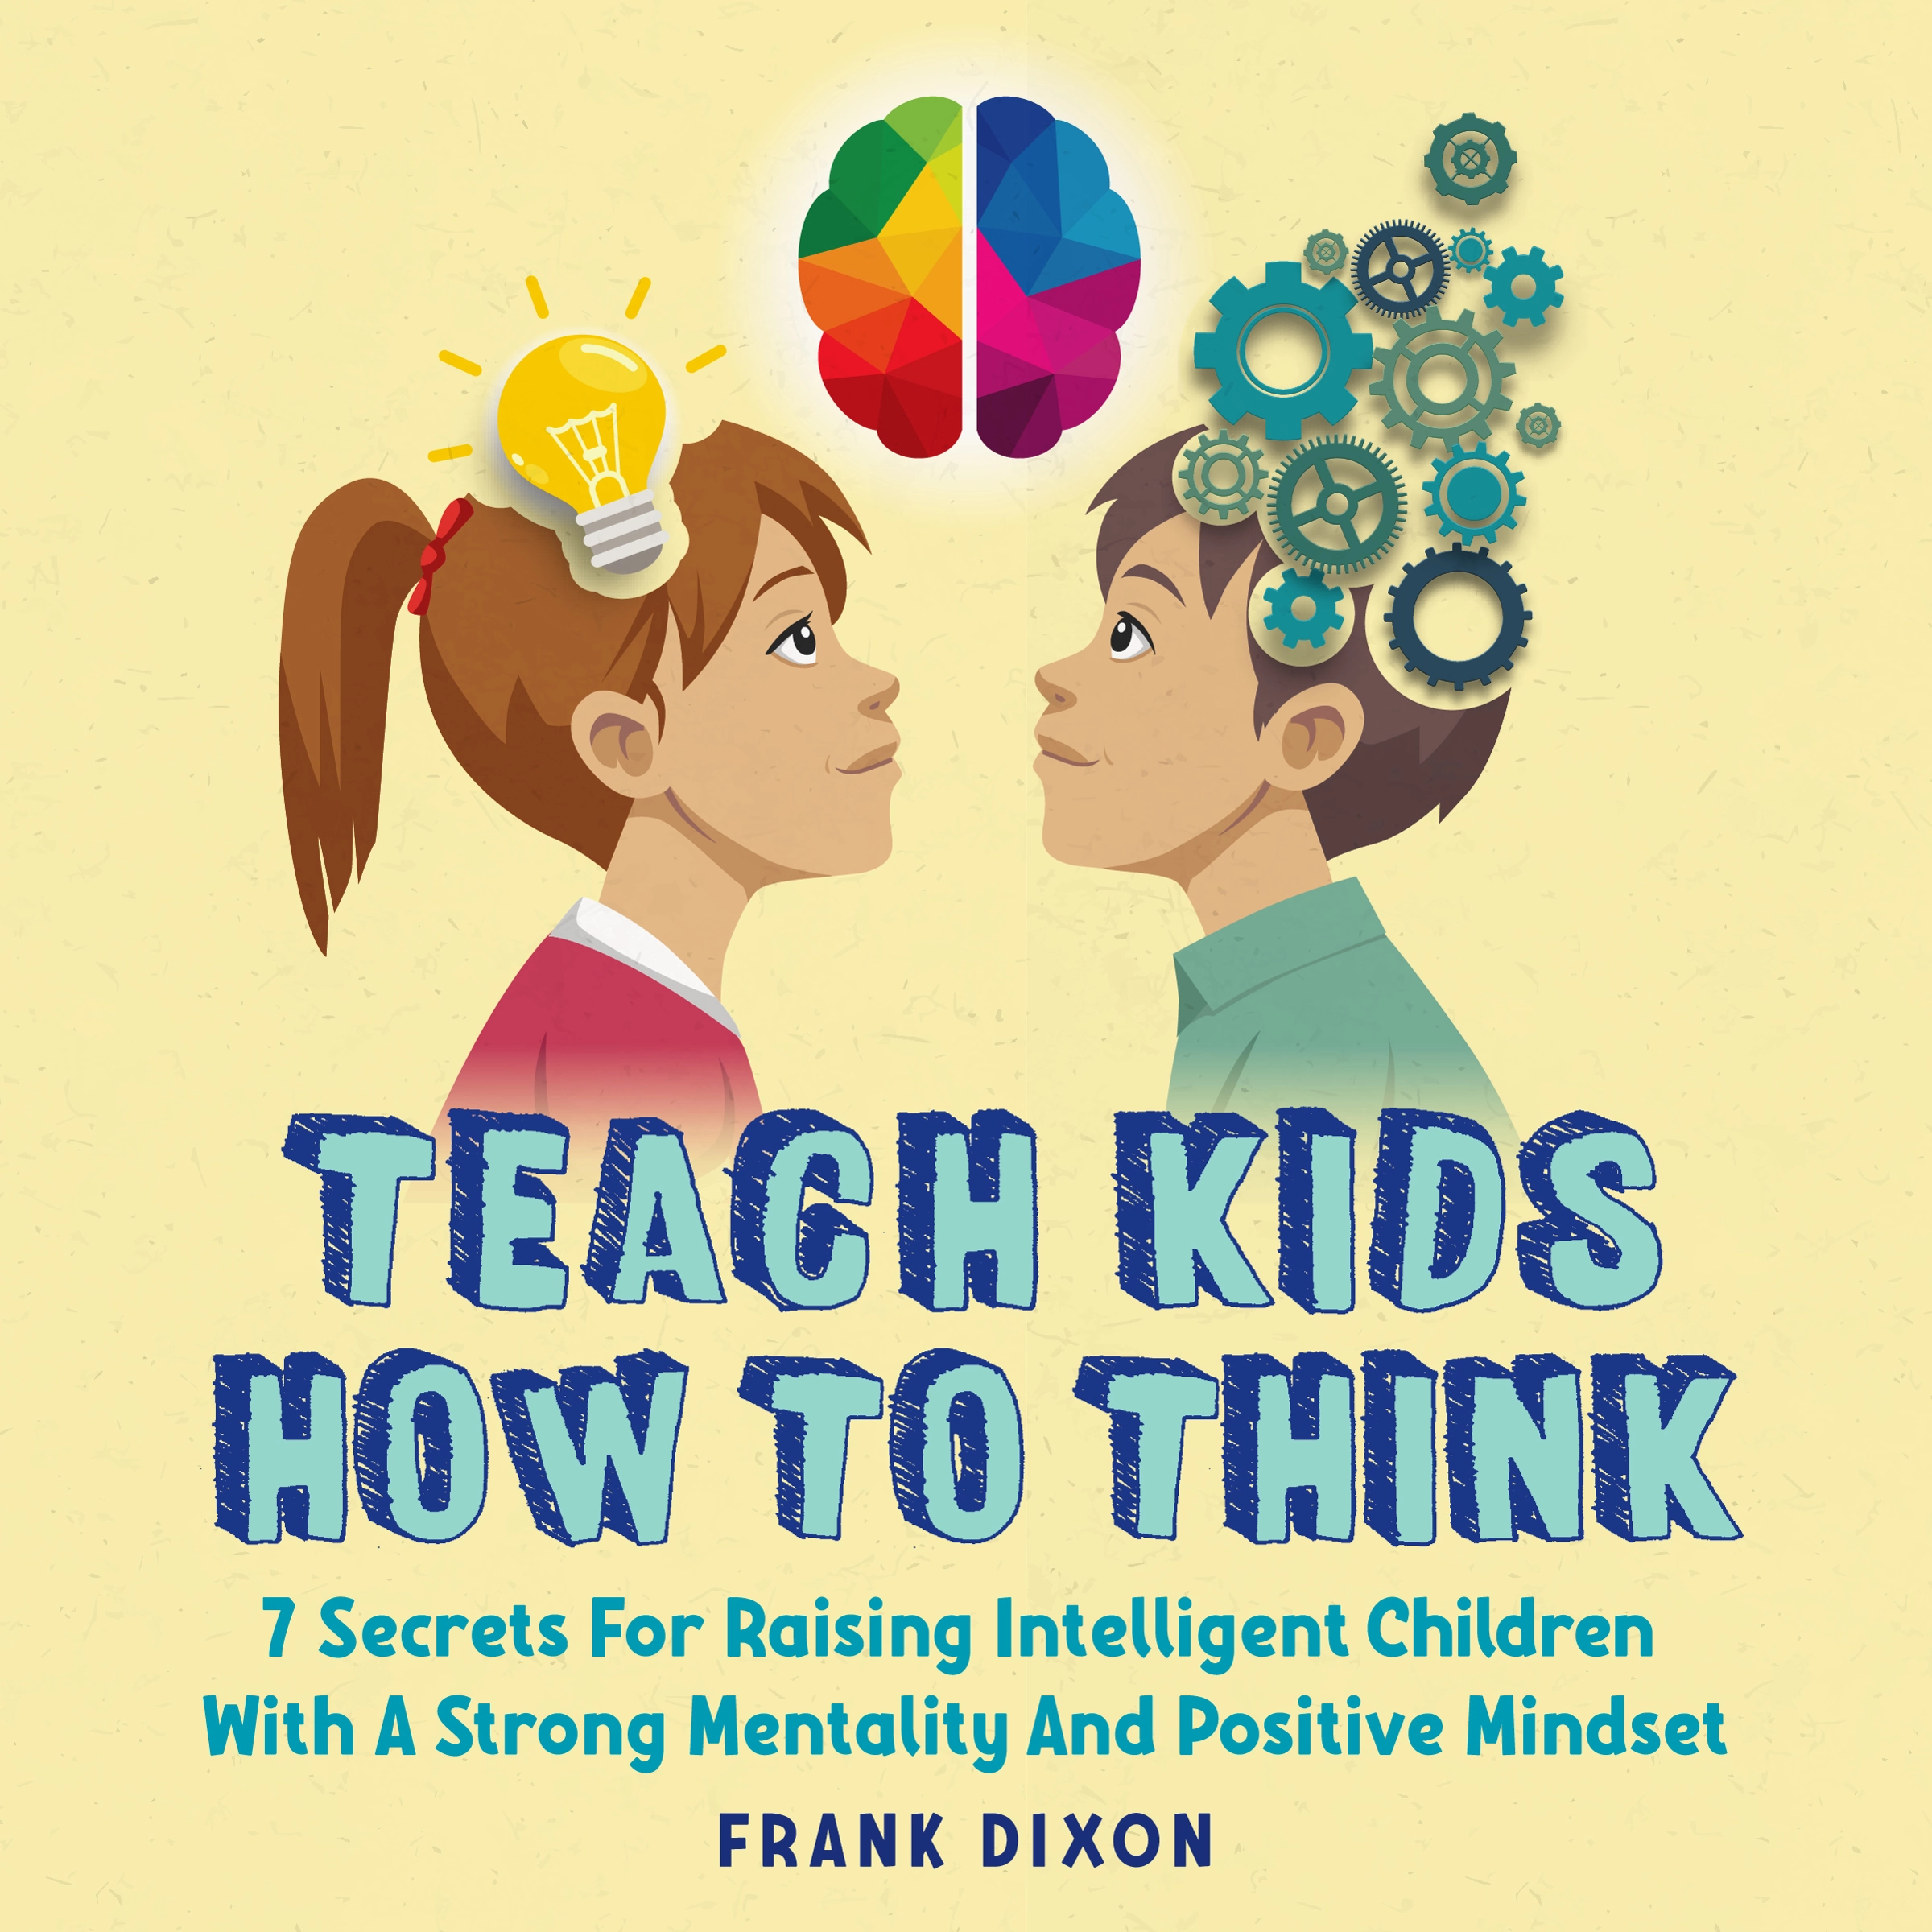 Teach Kids How to Think Audiobook by Frank Dixon